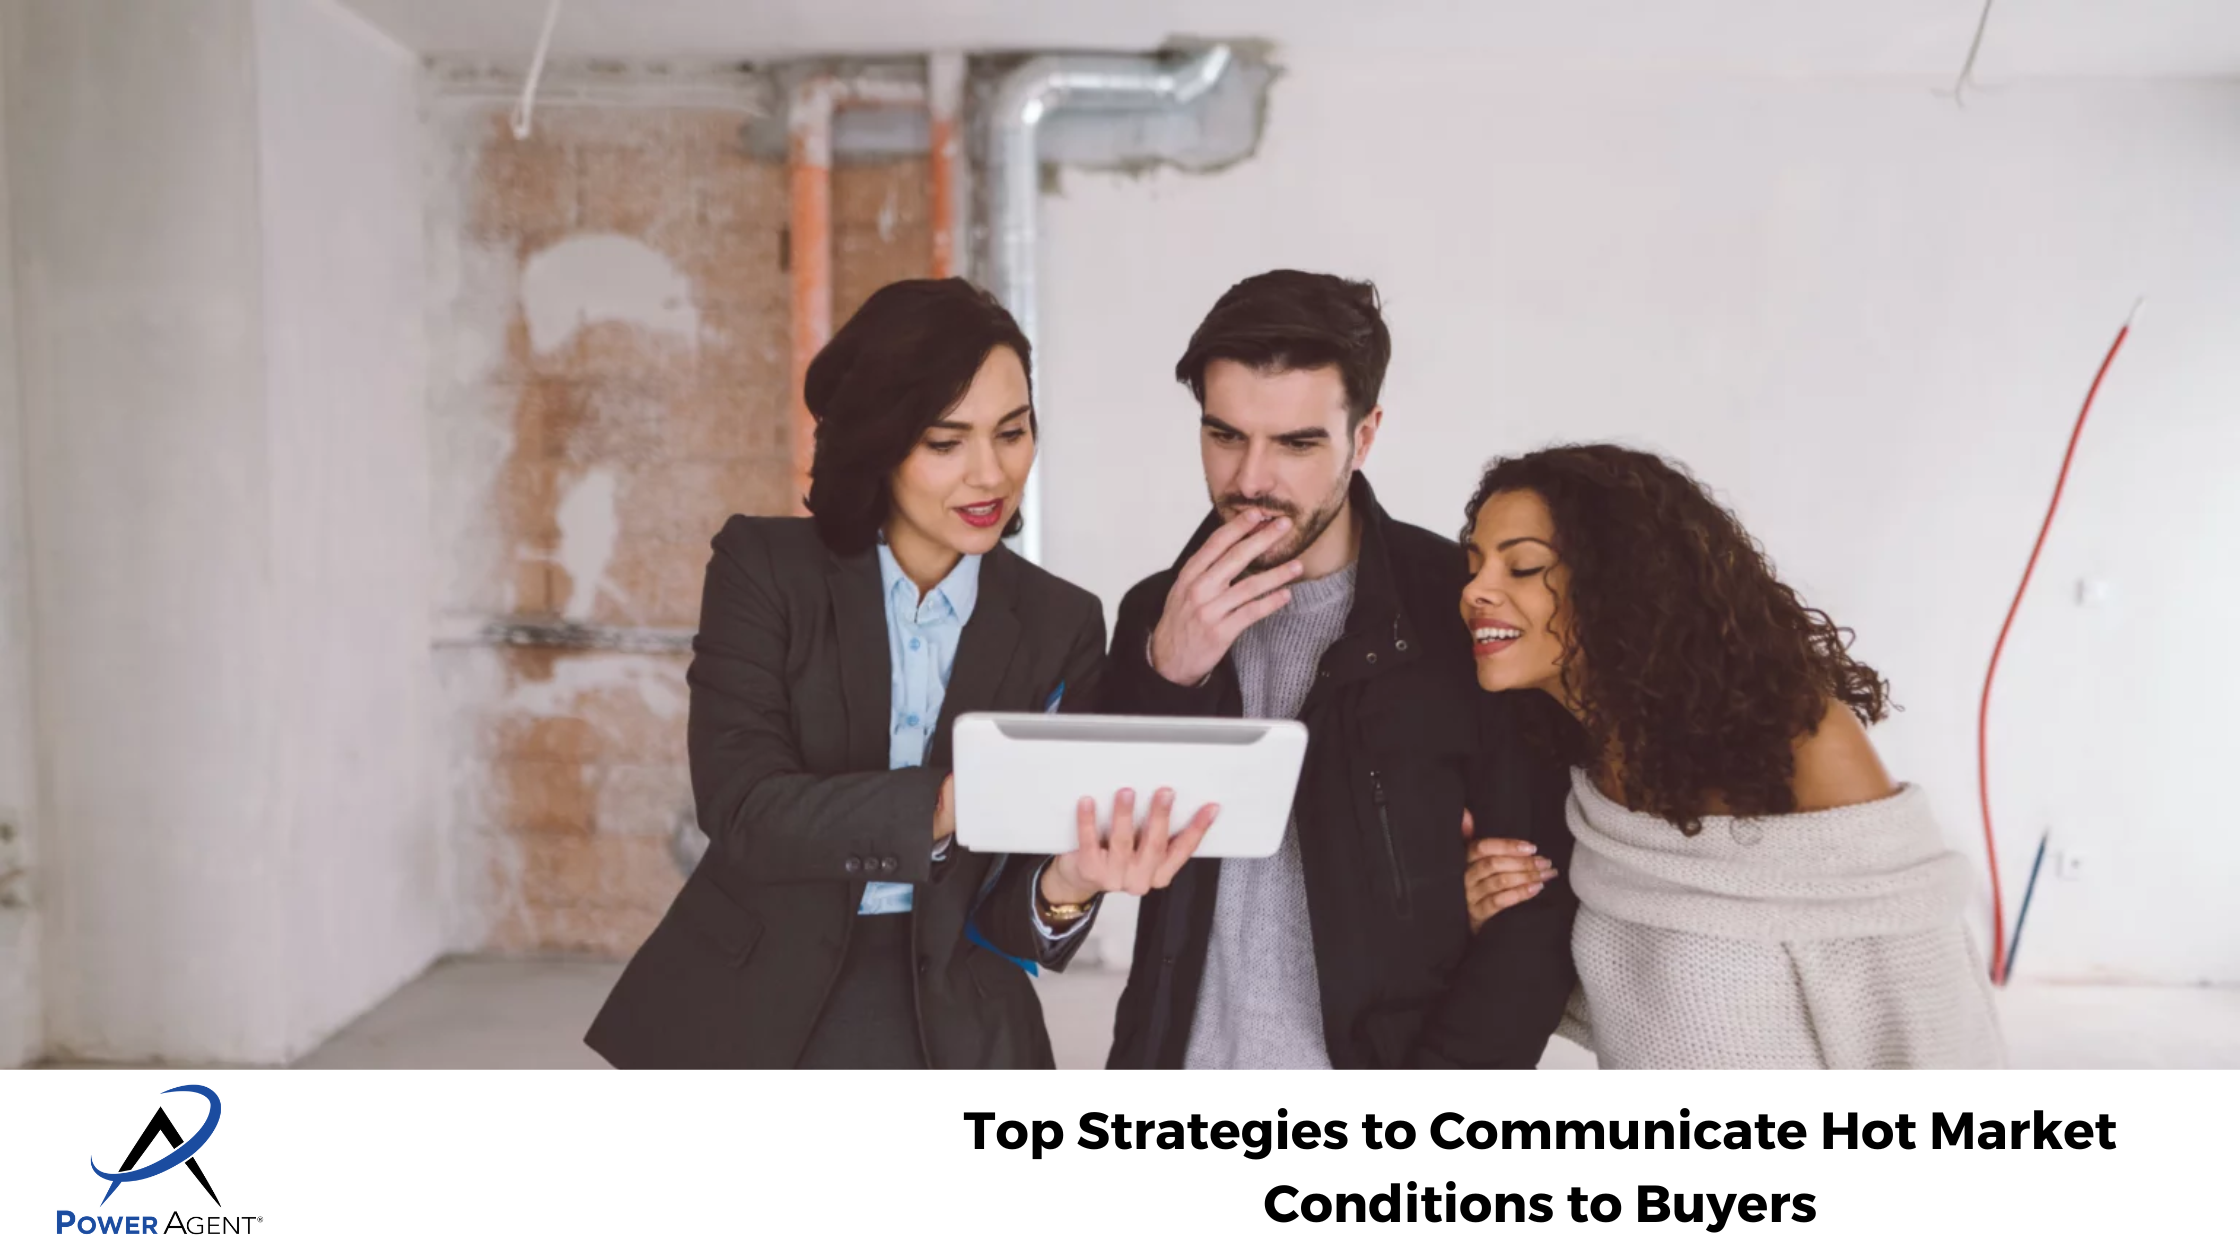 Top Strategies to Communicate Hot Market Conditions to Buyers